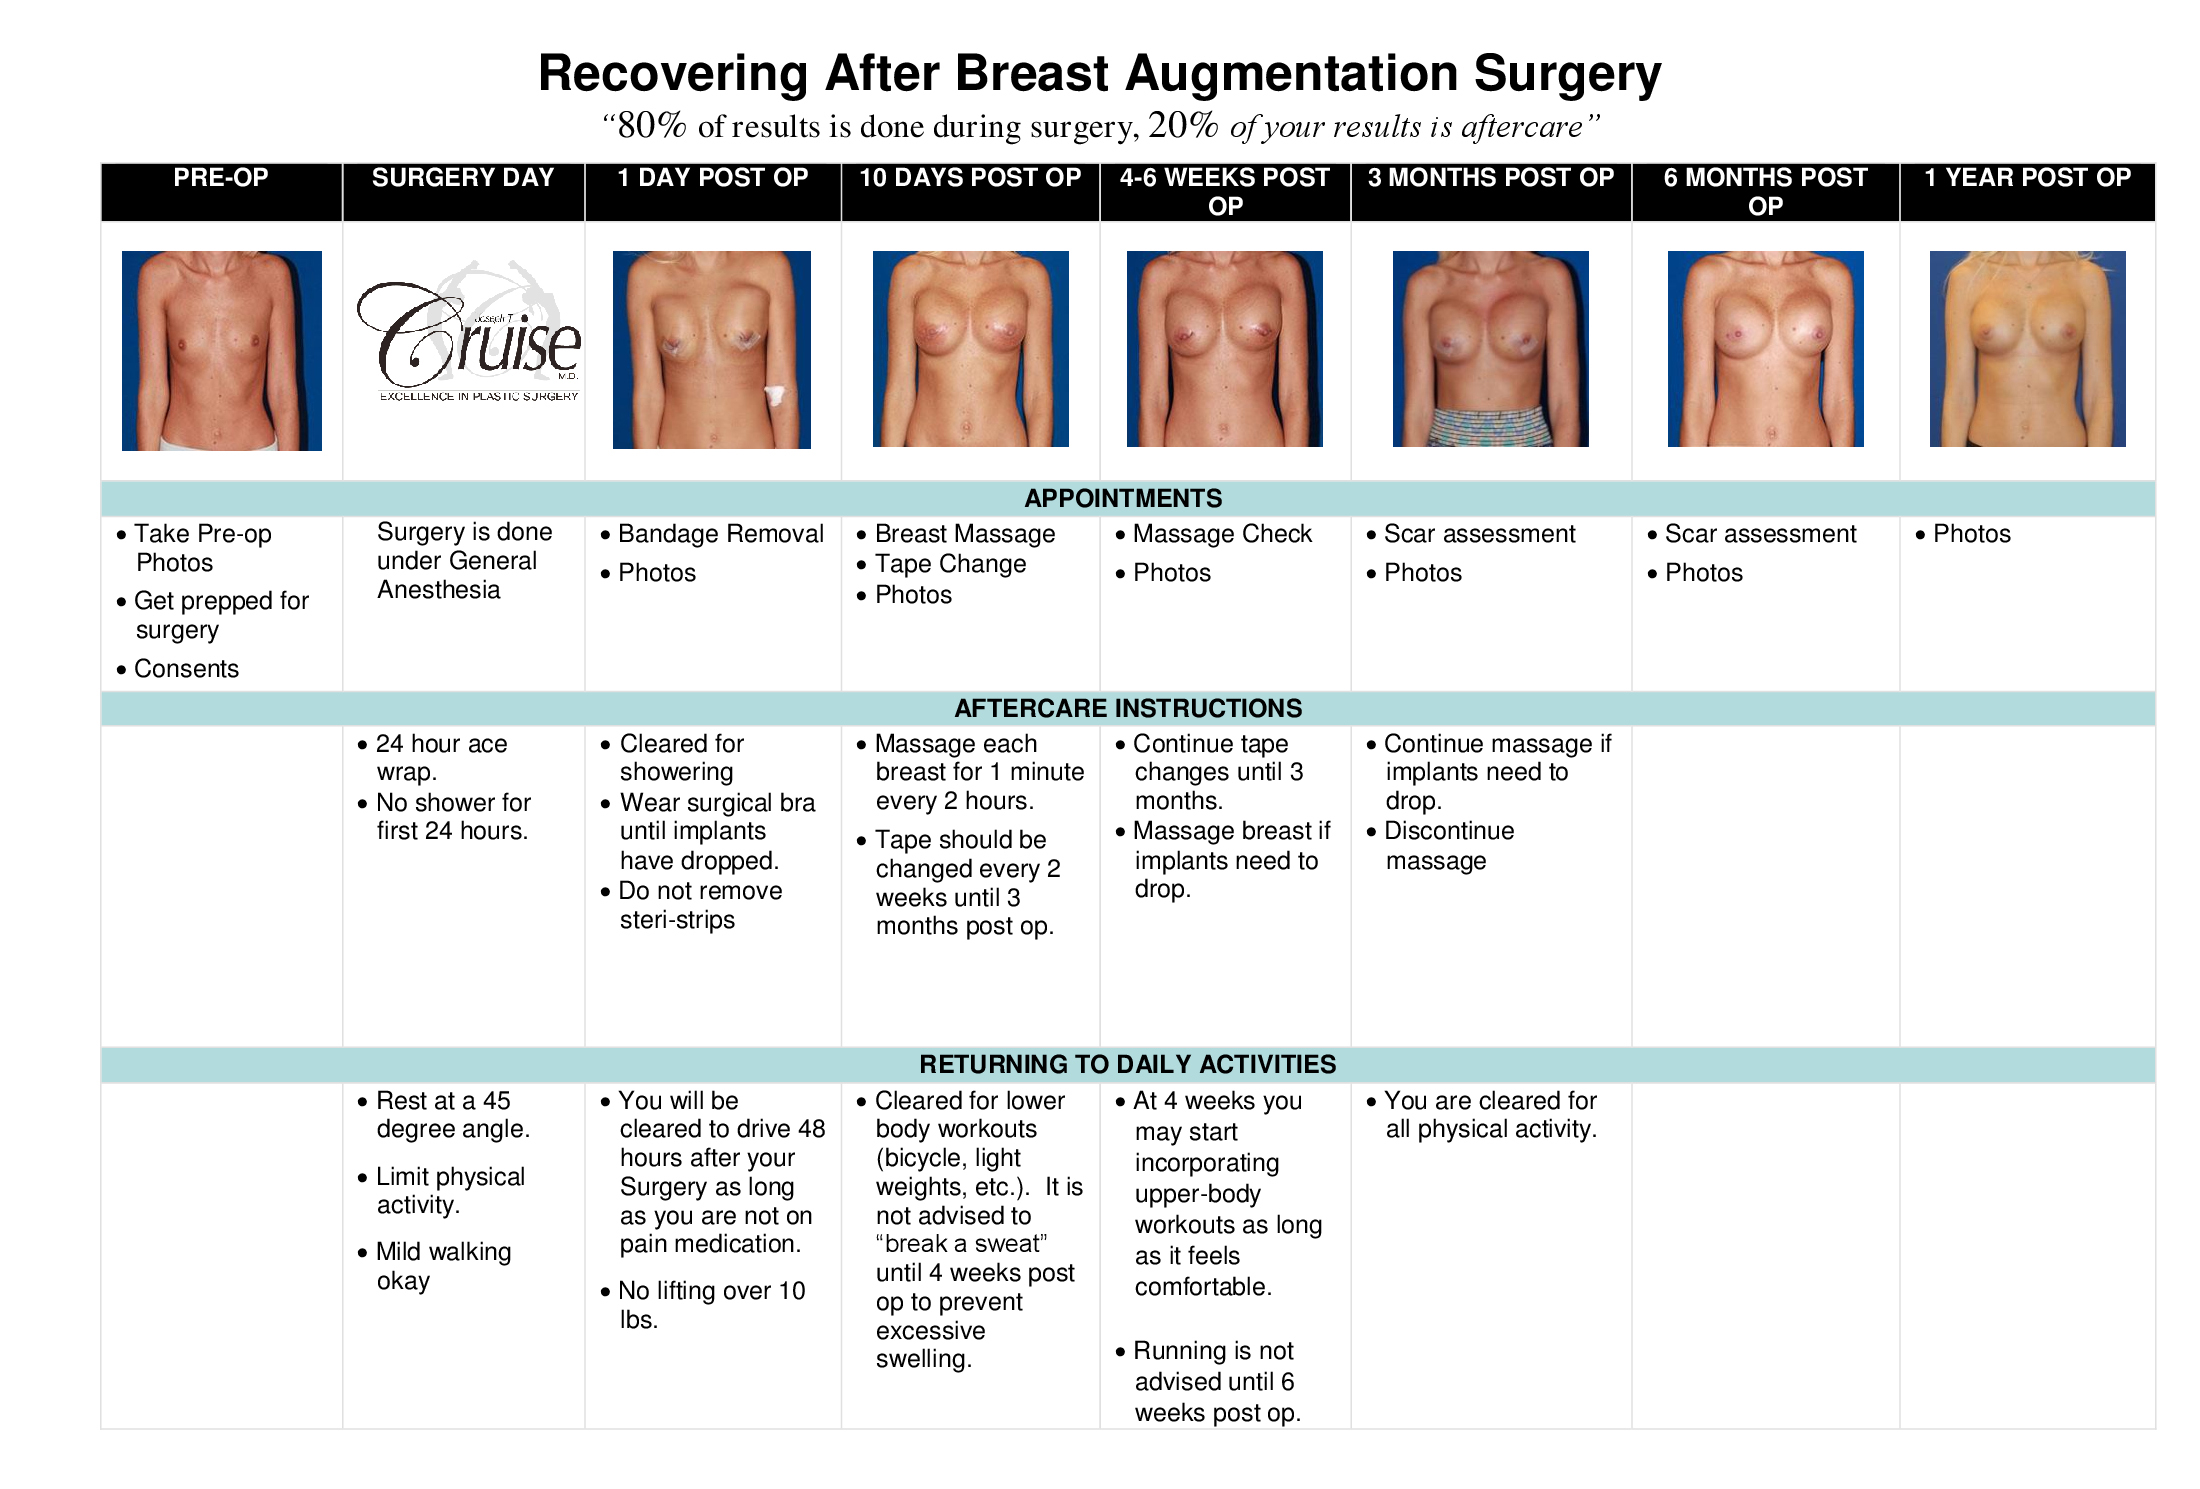 Should I Massage My Breasts After Breast Implant Surgery?